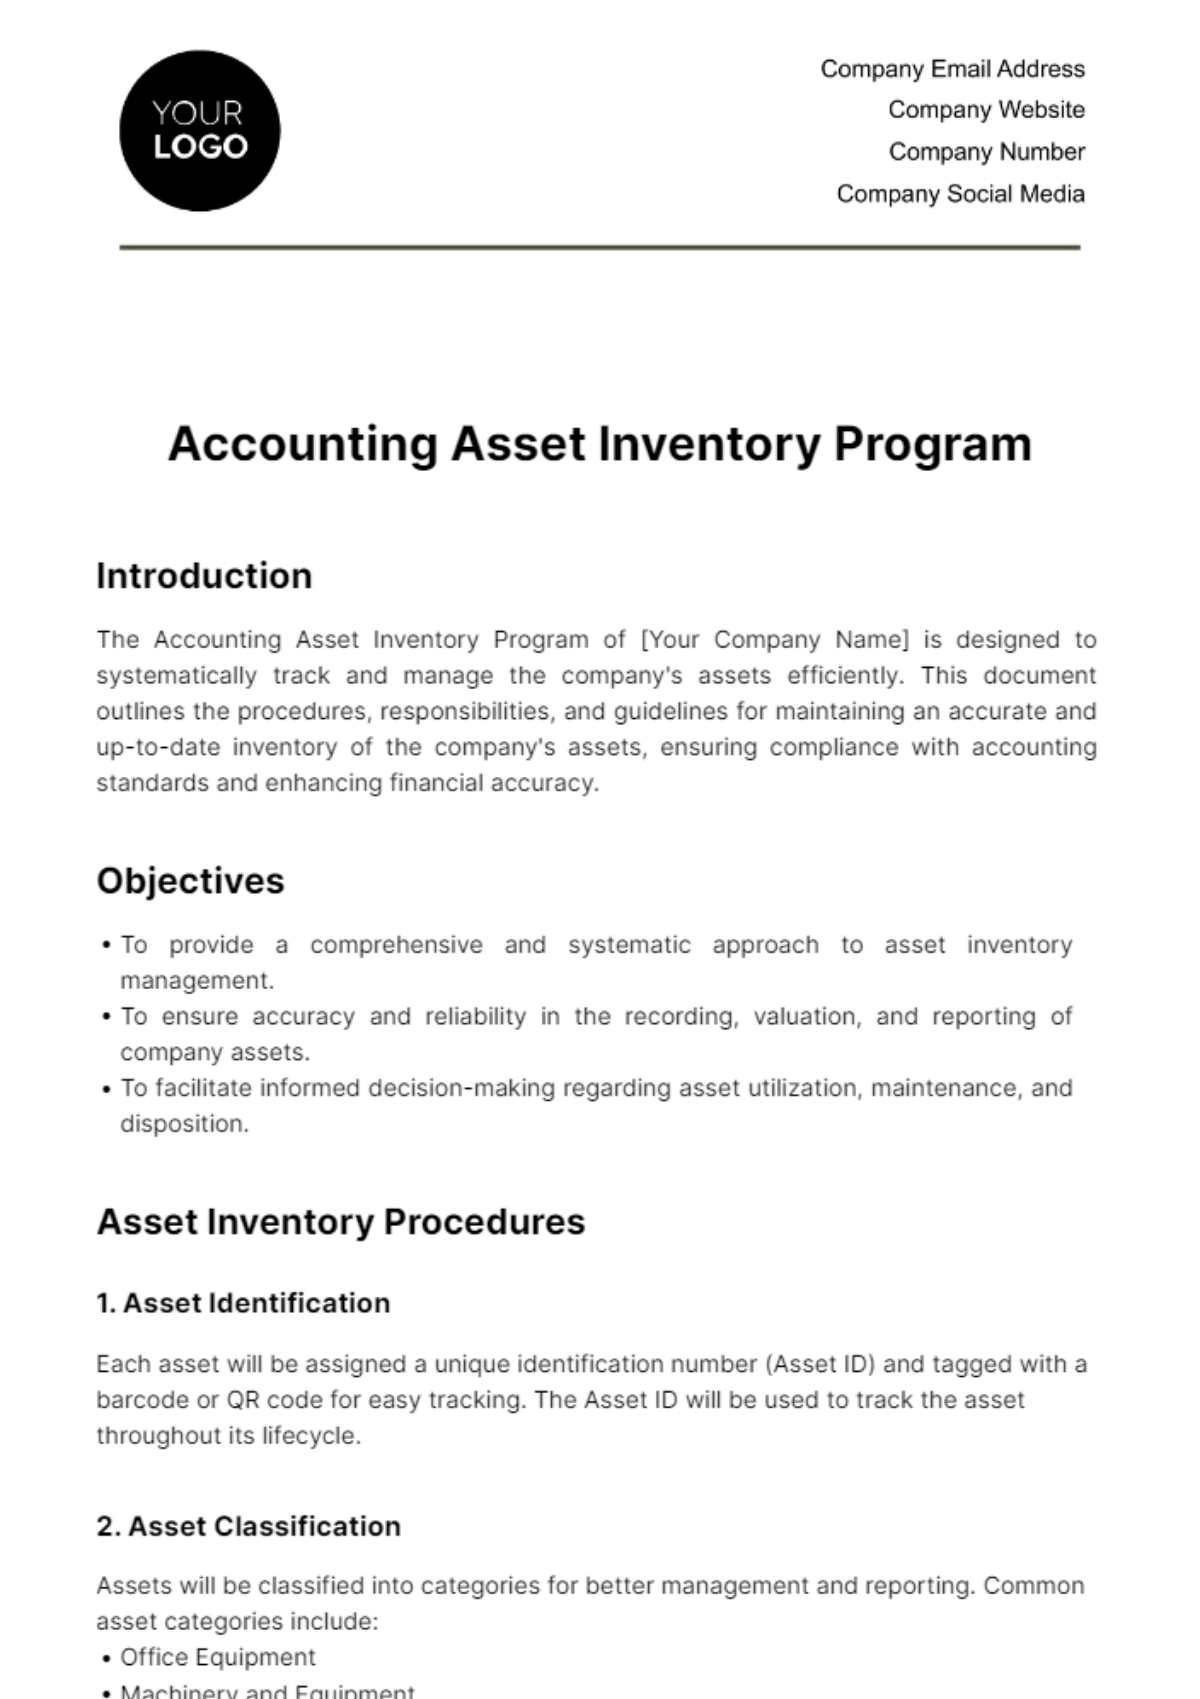 Accounting Asset Inventory Program Template